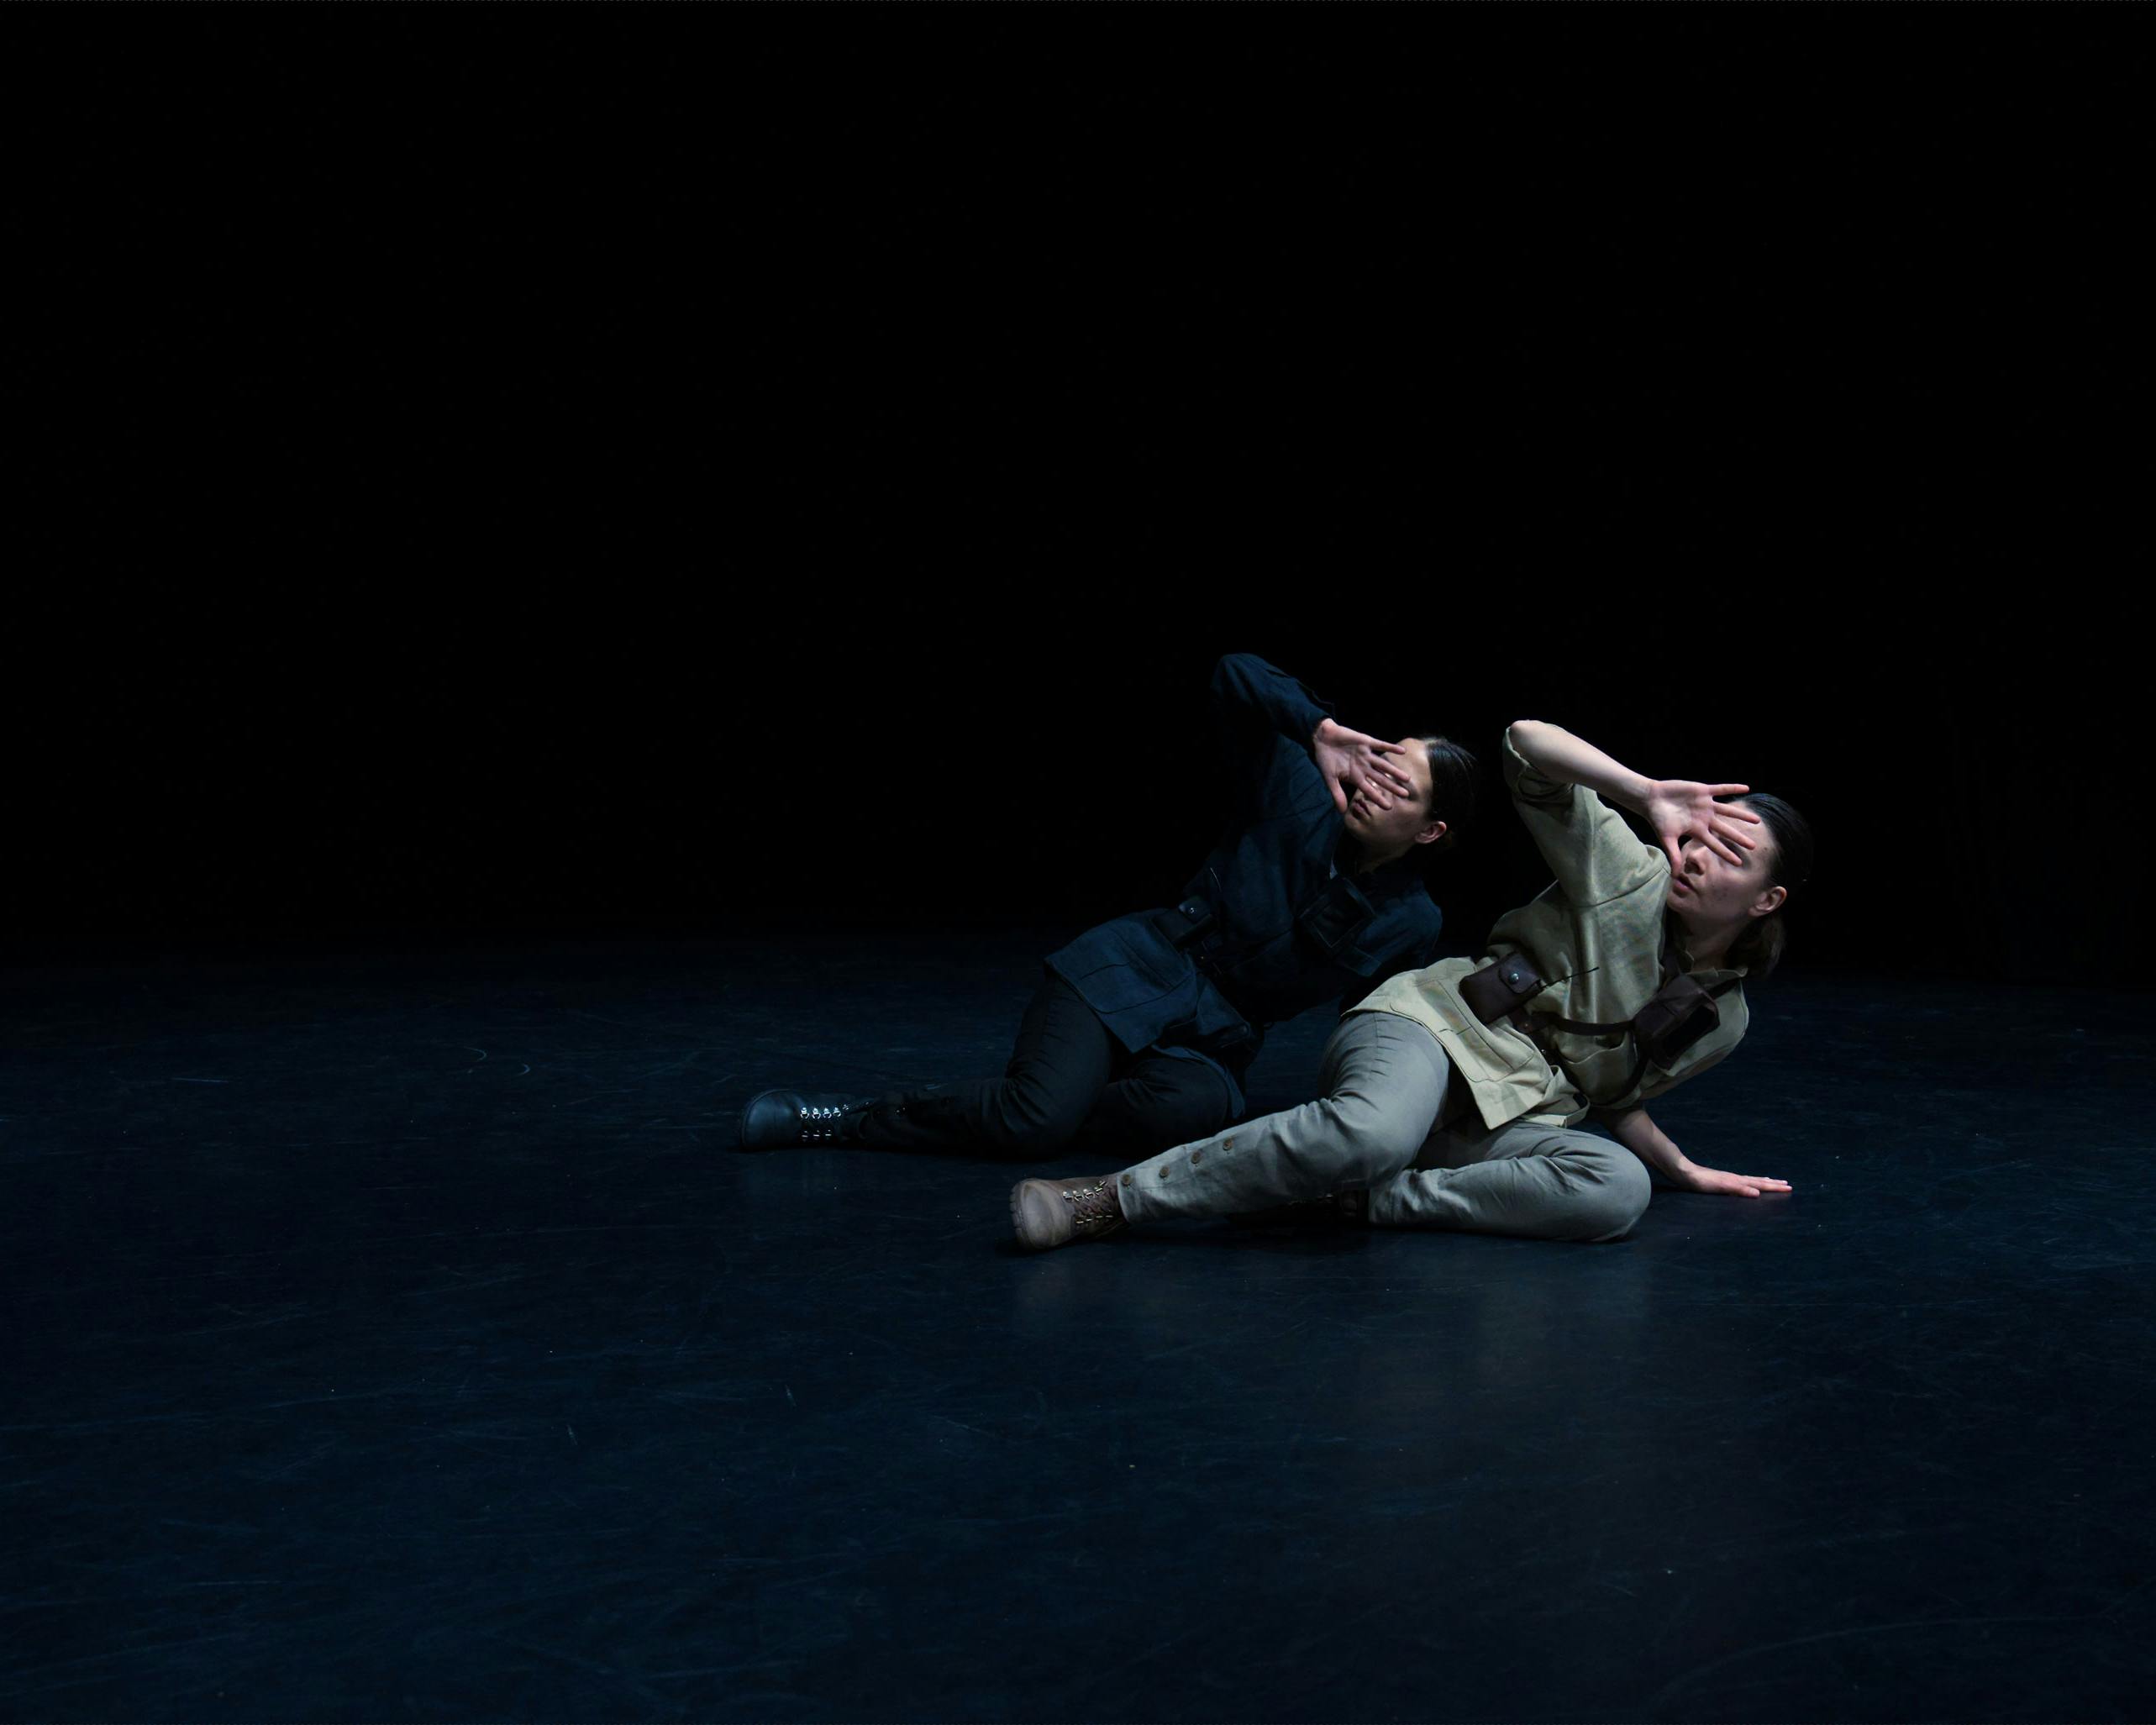 Two dancers semi-reclining in front of each other, cover their faces with one hand as if protecting themselves from a light.